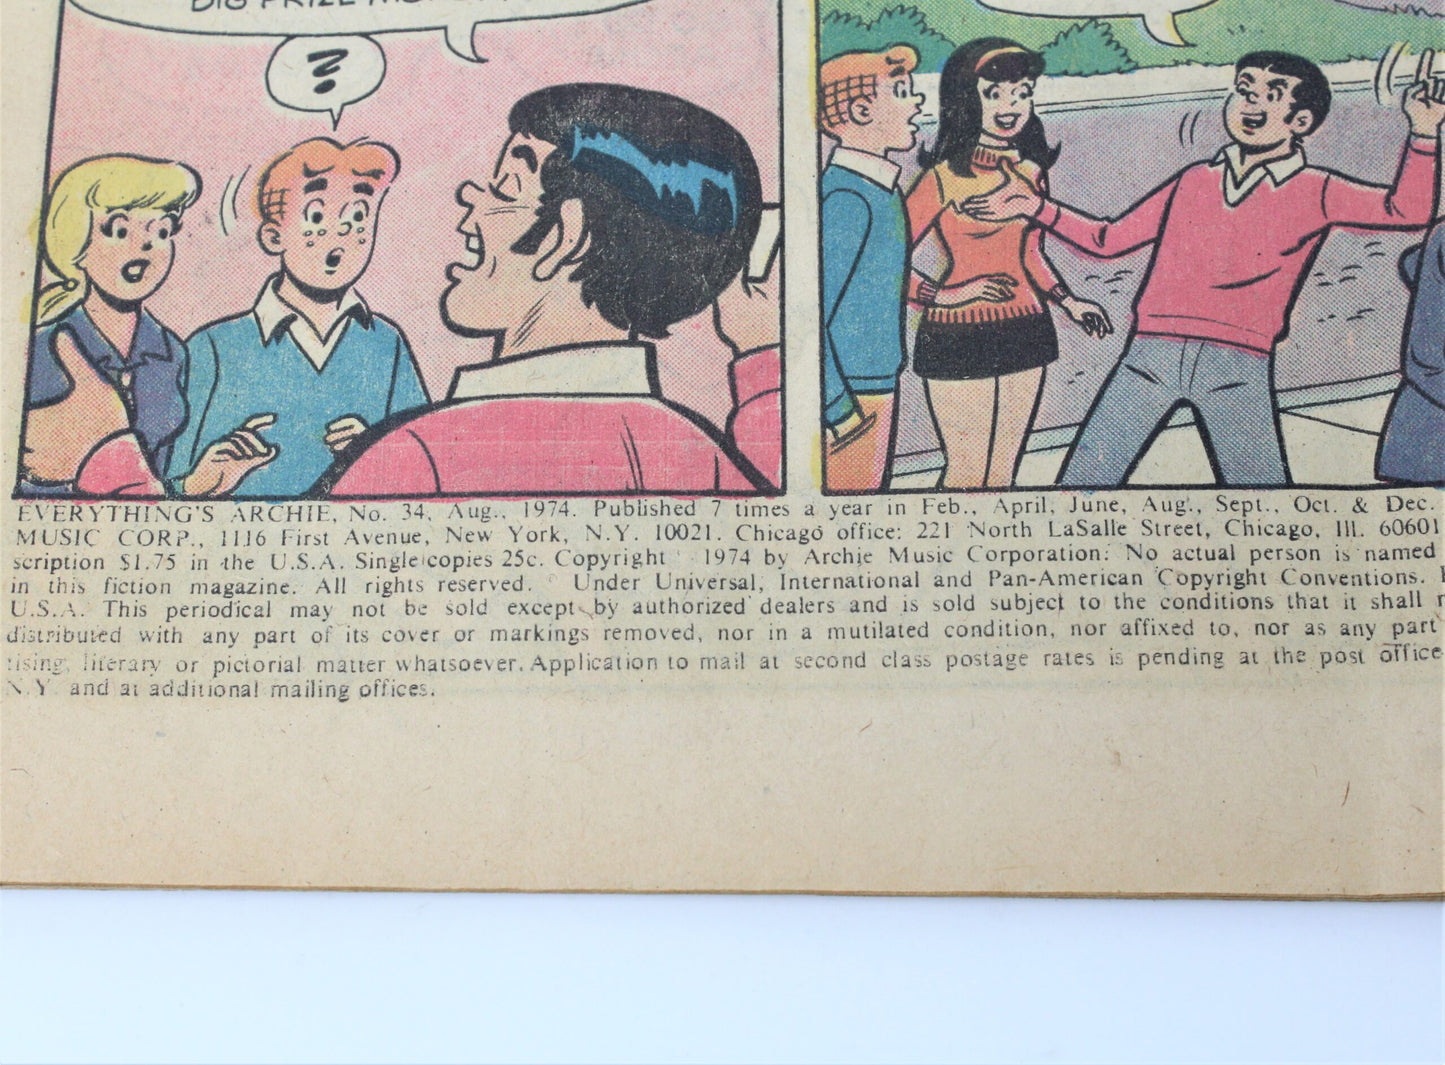 Comic Book, Archie Series, Everything's Archie #34, Vintage 1974